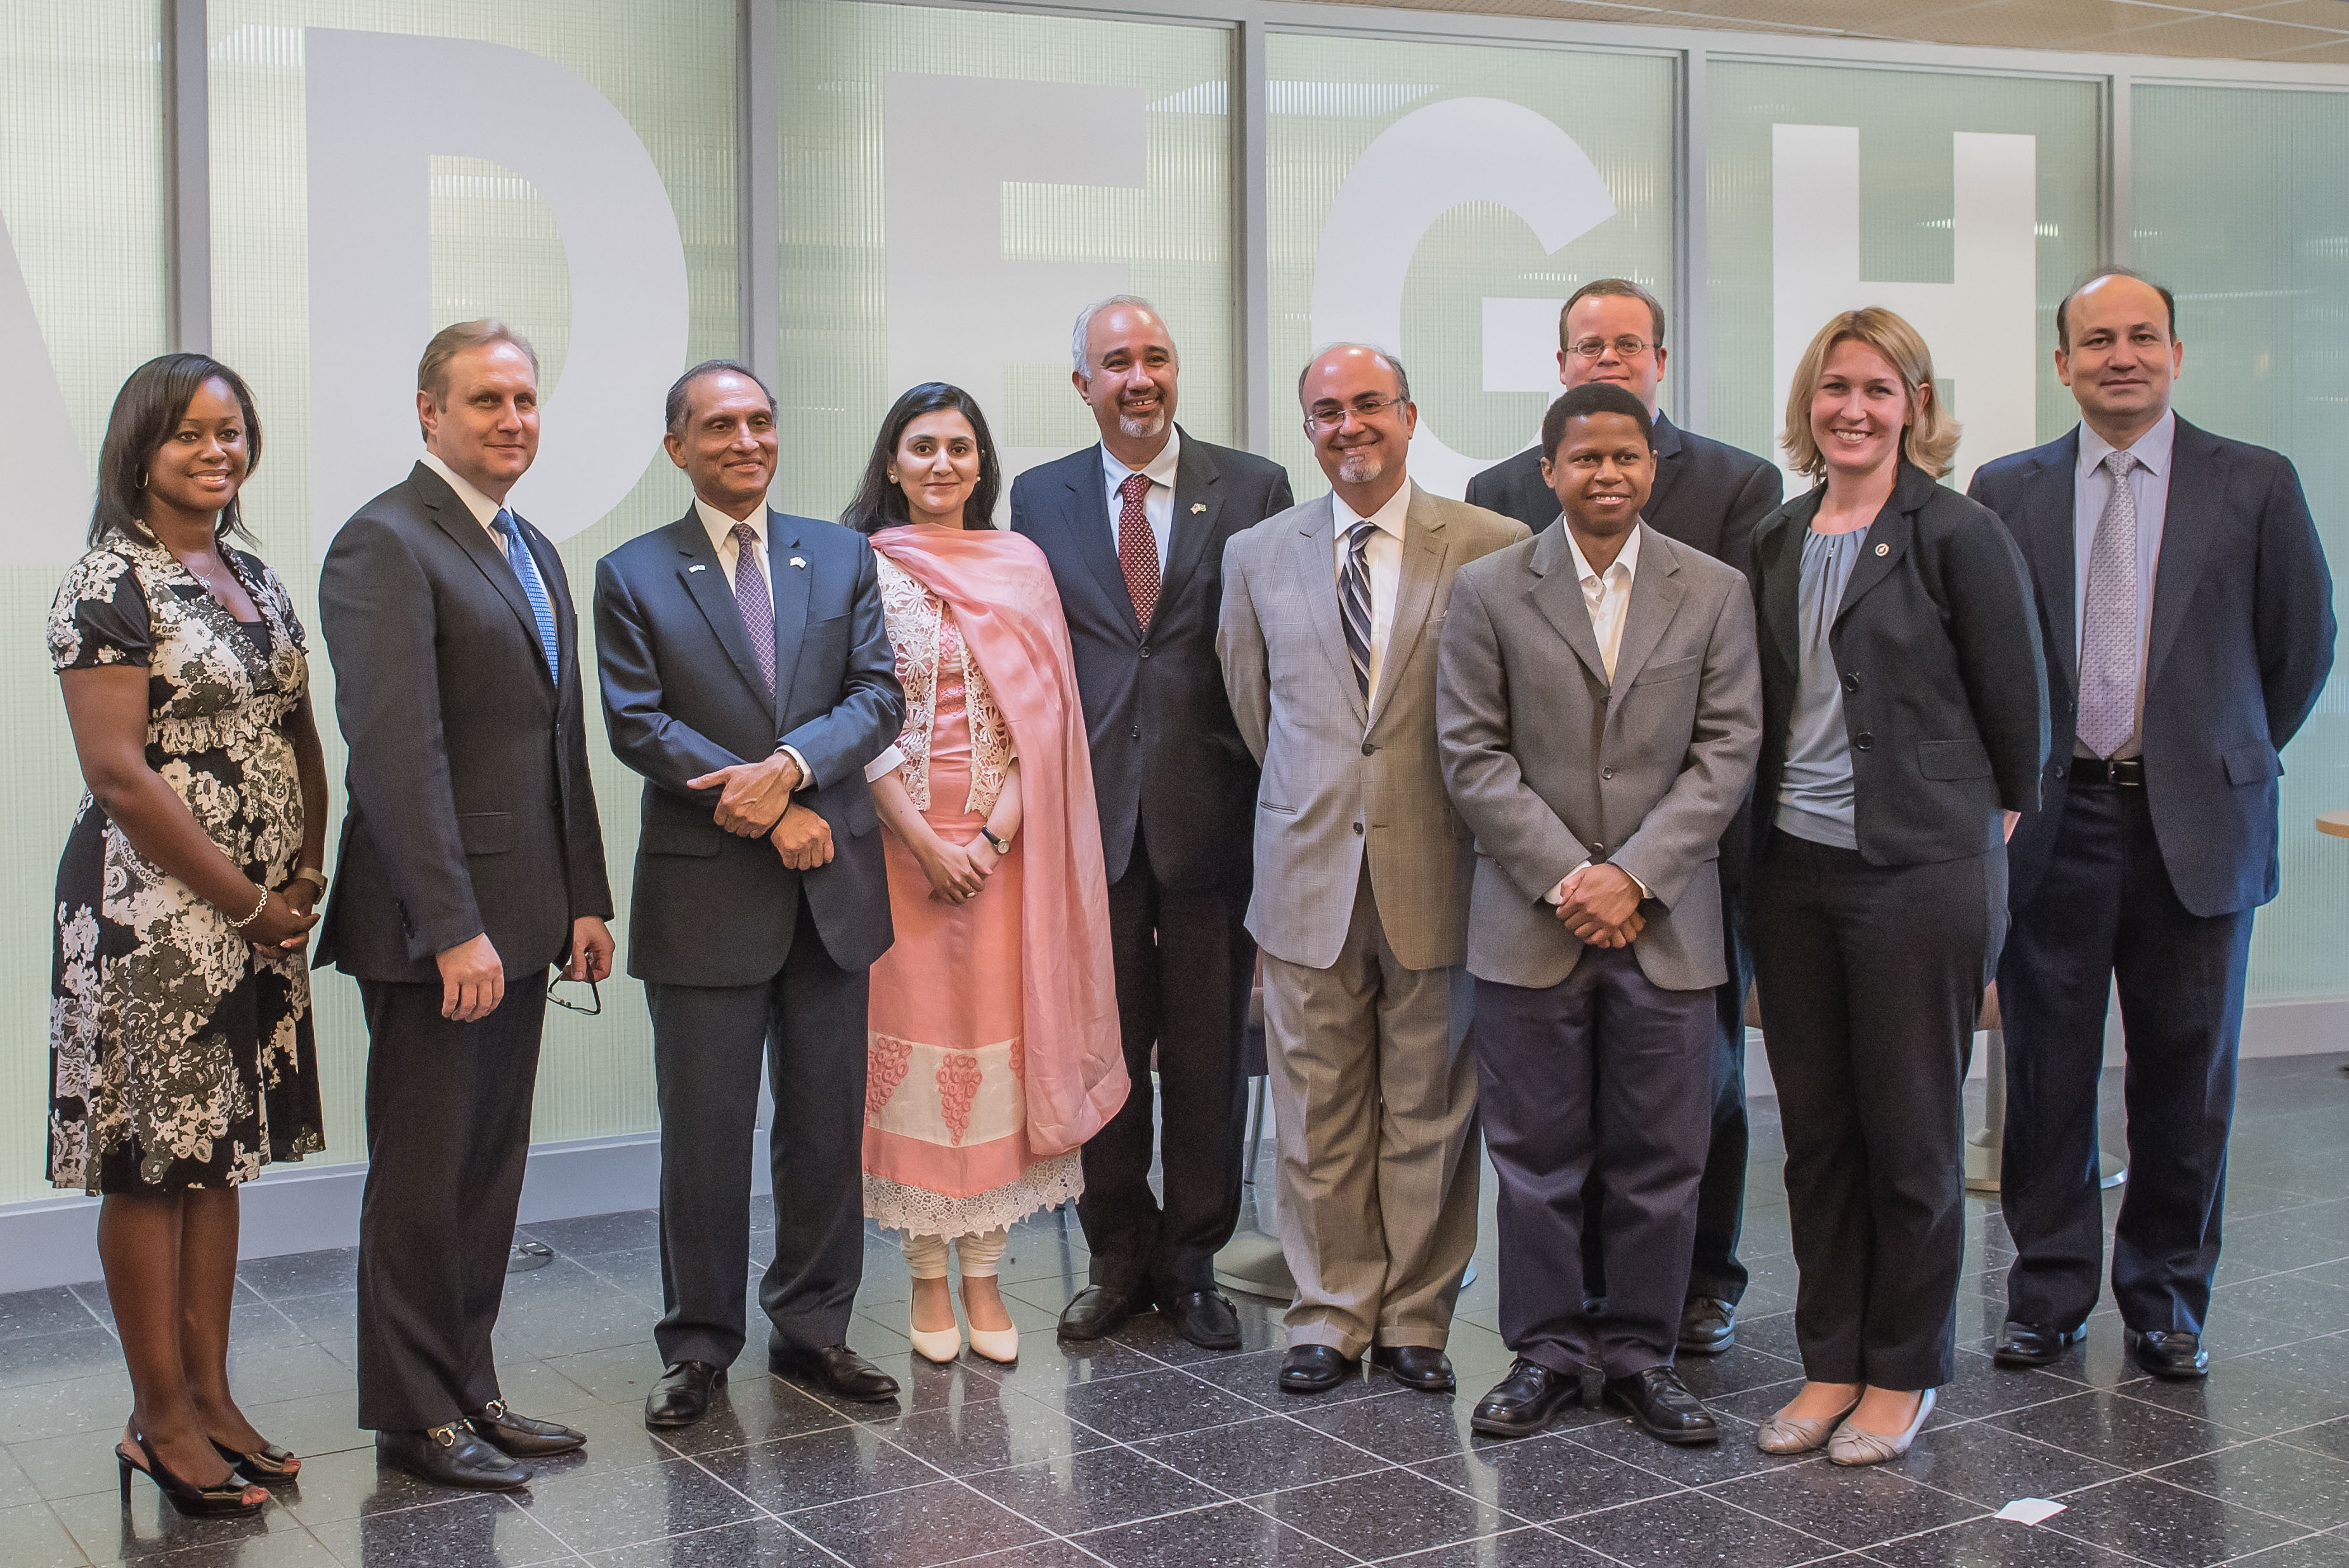 Pakistan Ambassador to the United States His Excellency Mr. Aizaz Ahmad Chaudhry visited the Mossadegh Servant Leaders Hall on July 24, 2017. NEIU Interim President Dr. Richard Helldobler, Vice President of Institutional Advancement Liesl Downy, Acting Dean of College of Arts and Sciences Dr. Katrina Bell-Jordan, The Mossadegh Initiative Principal Dr. Mateo Farzaneh, and Political Science Professor Dr. Marshall Thompson among others.